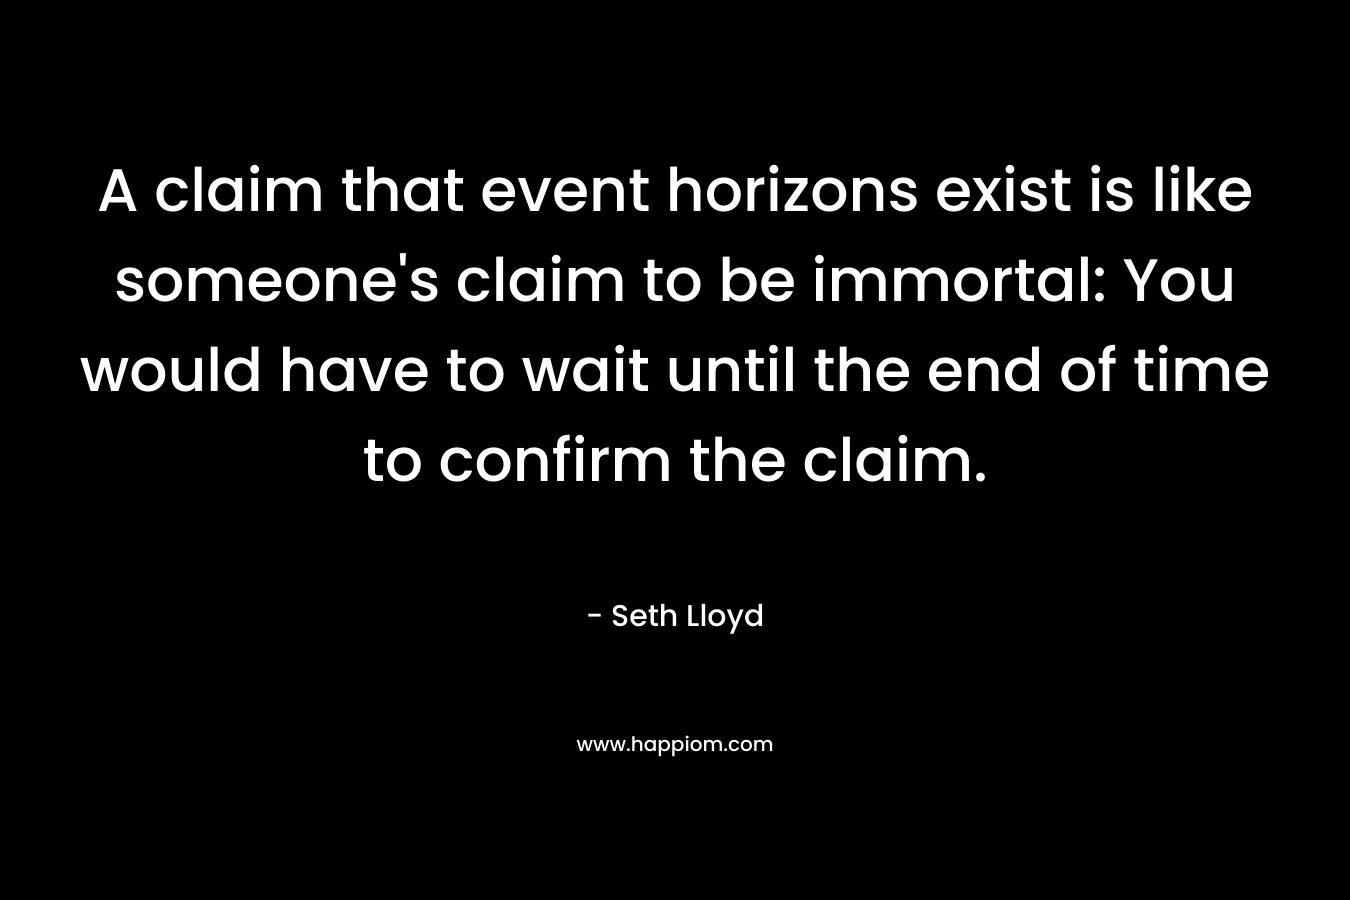 A claim that event horizons exist is like someone's claim to be immortal: You would have to wait until the end of time to confirm the claim.